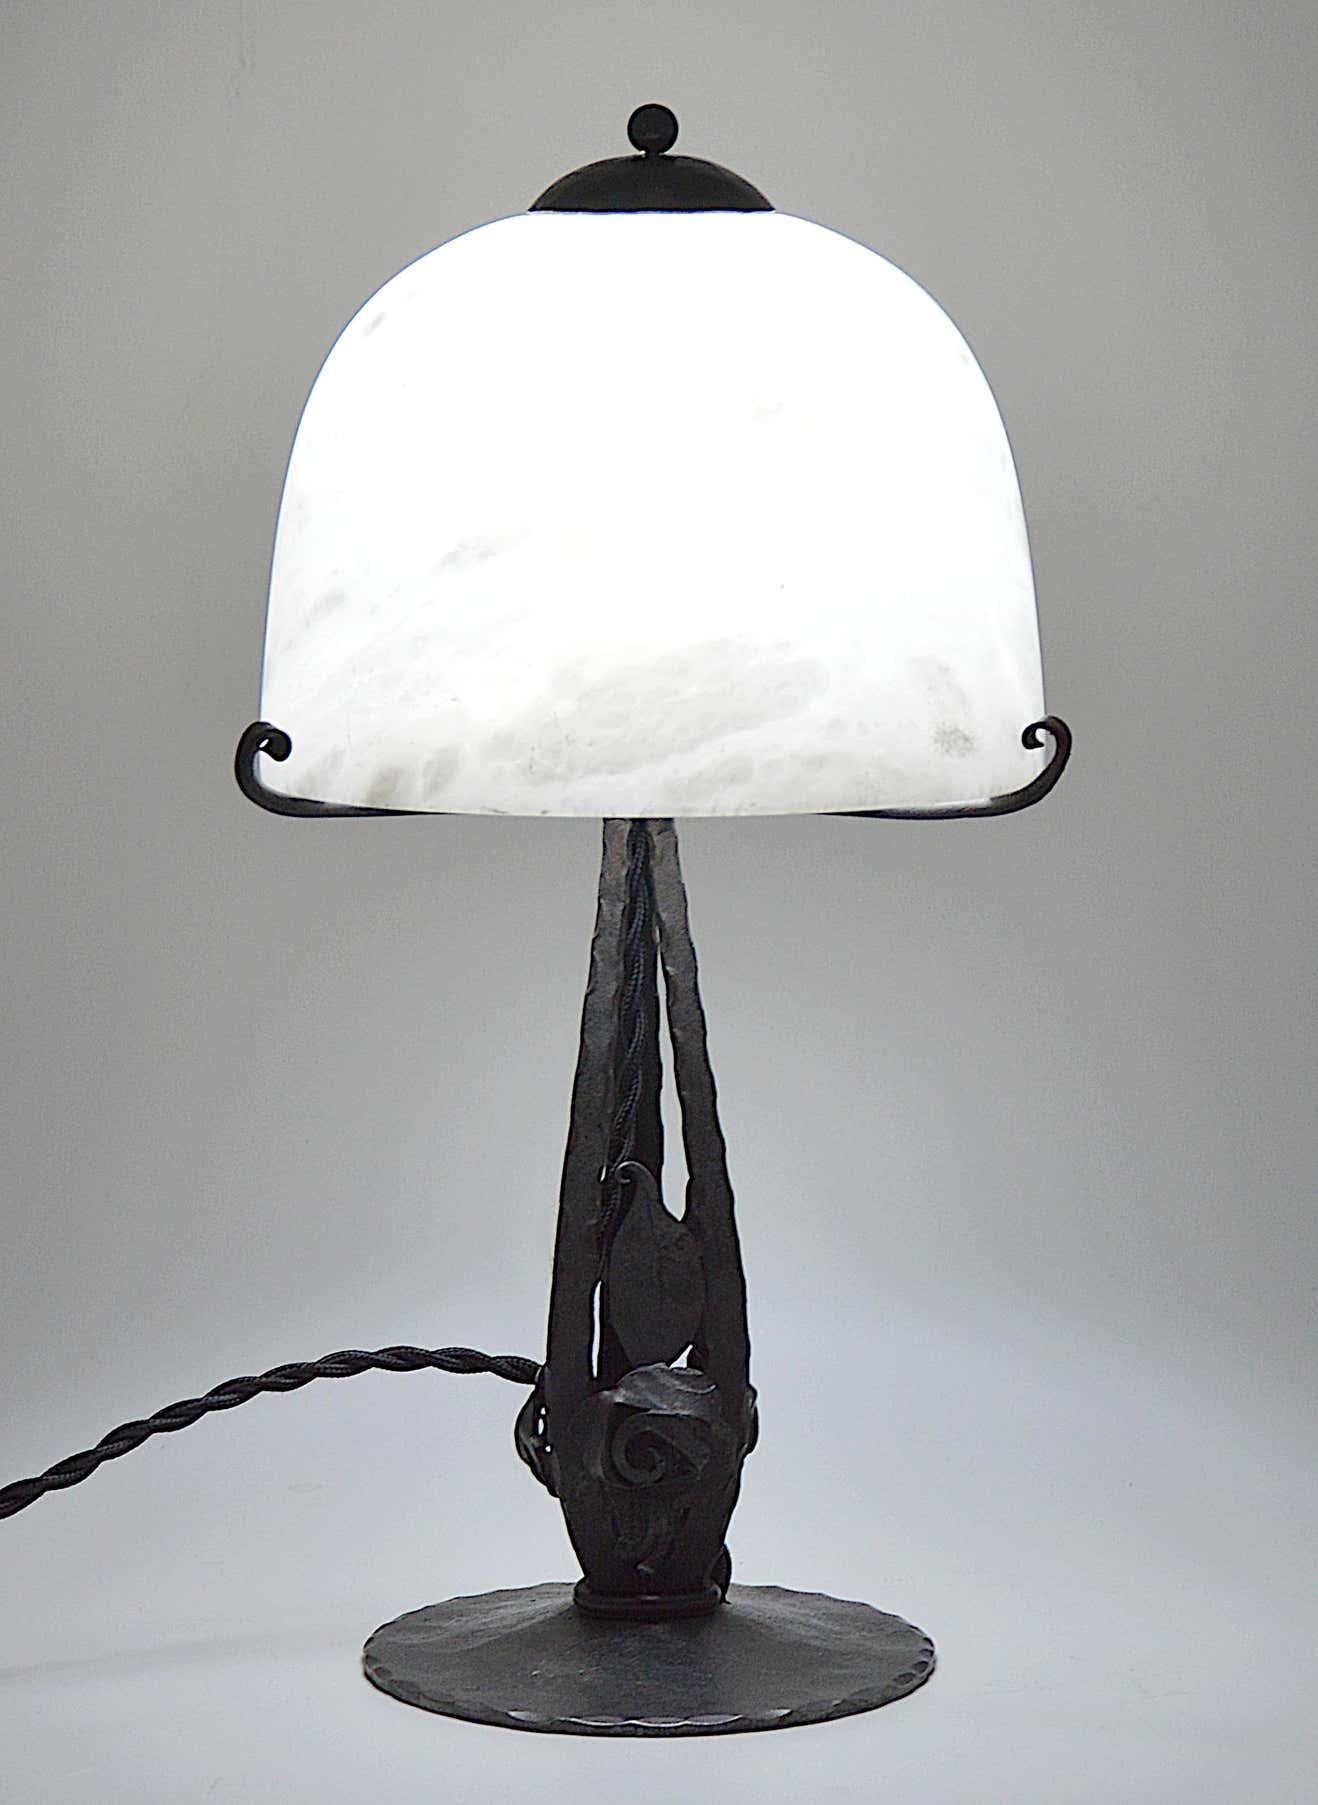 French Art Deco table lamp, France, 1920s. Very close to the Edgar Brant's or Kiss' work. The precious base comes with its alabaster shade. Height 15